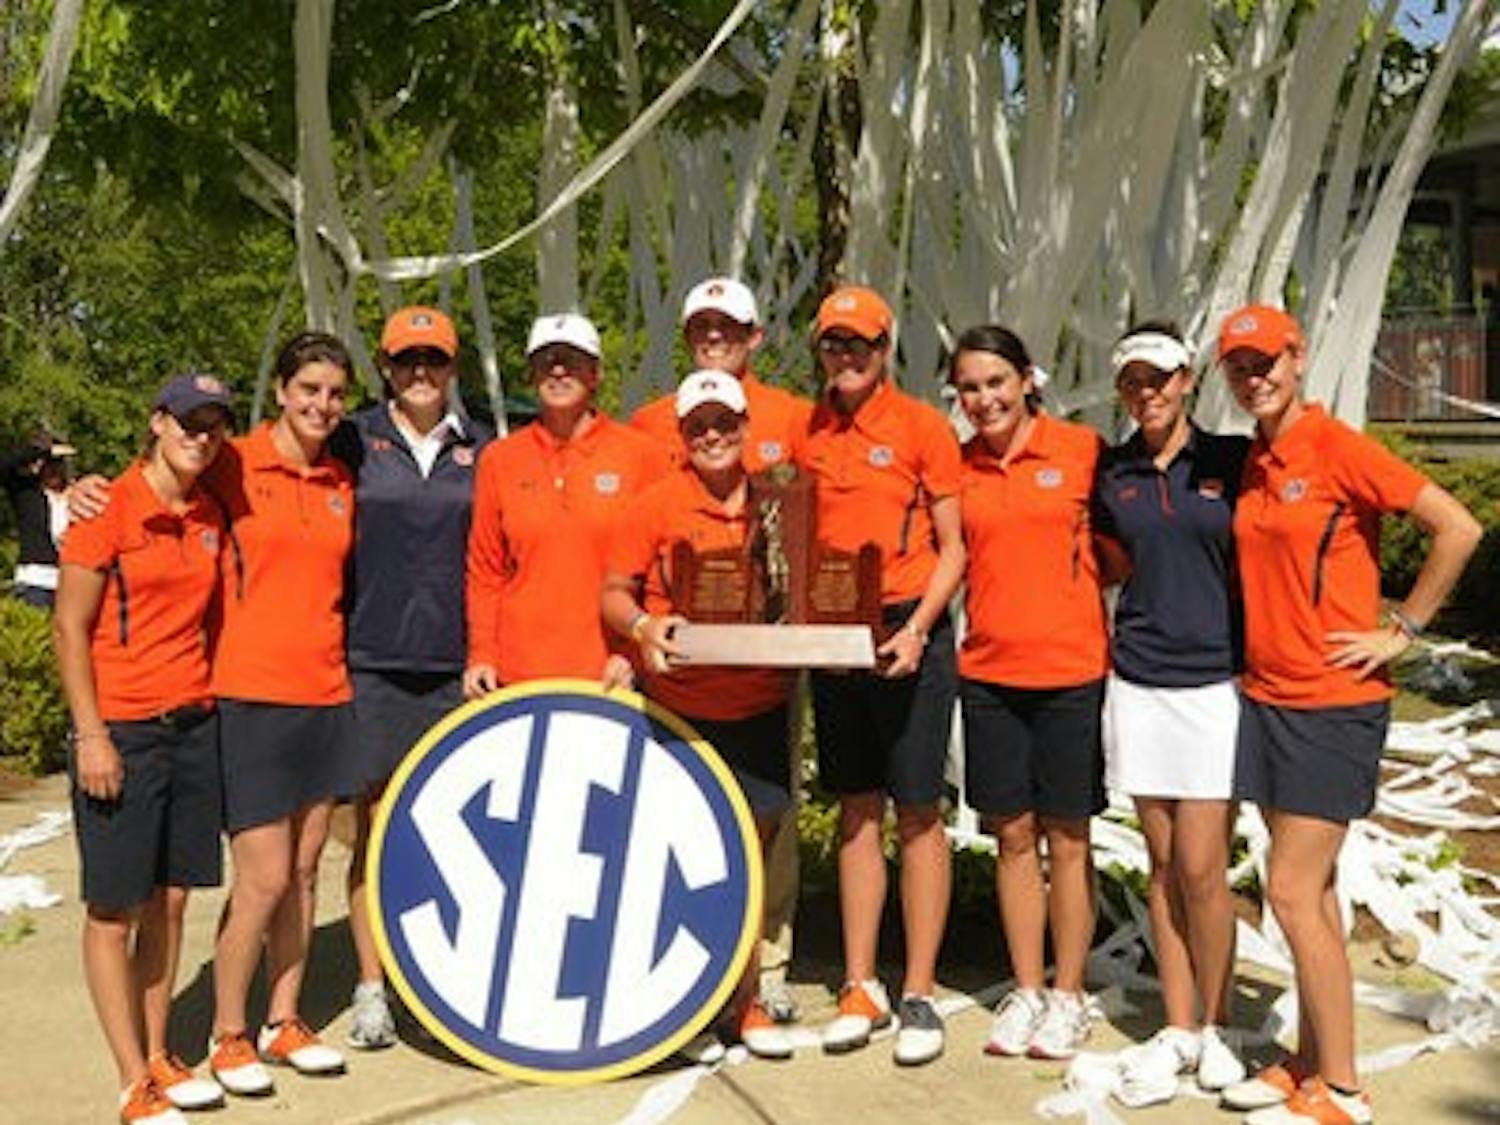 The women's golf team poses with the SEC Championship trophy after winning the title at home Sunday. The Tigers finished 11 strokes ahead of second-place Alabama. (Leffie Dailey / Auburn Media Relations)